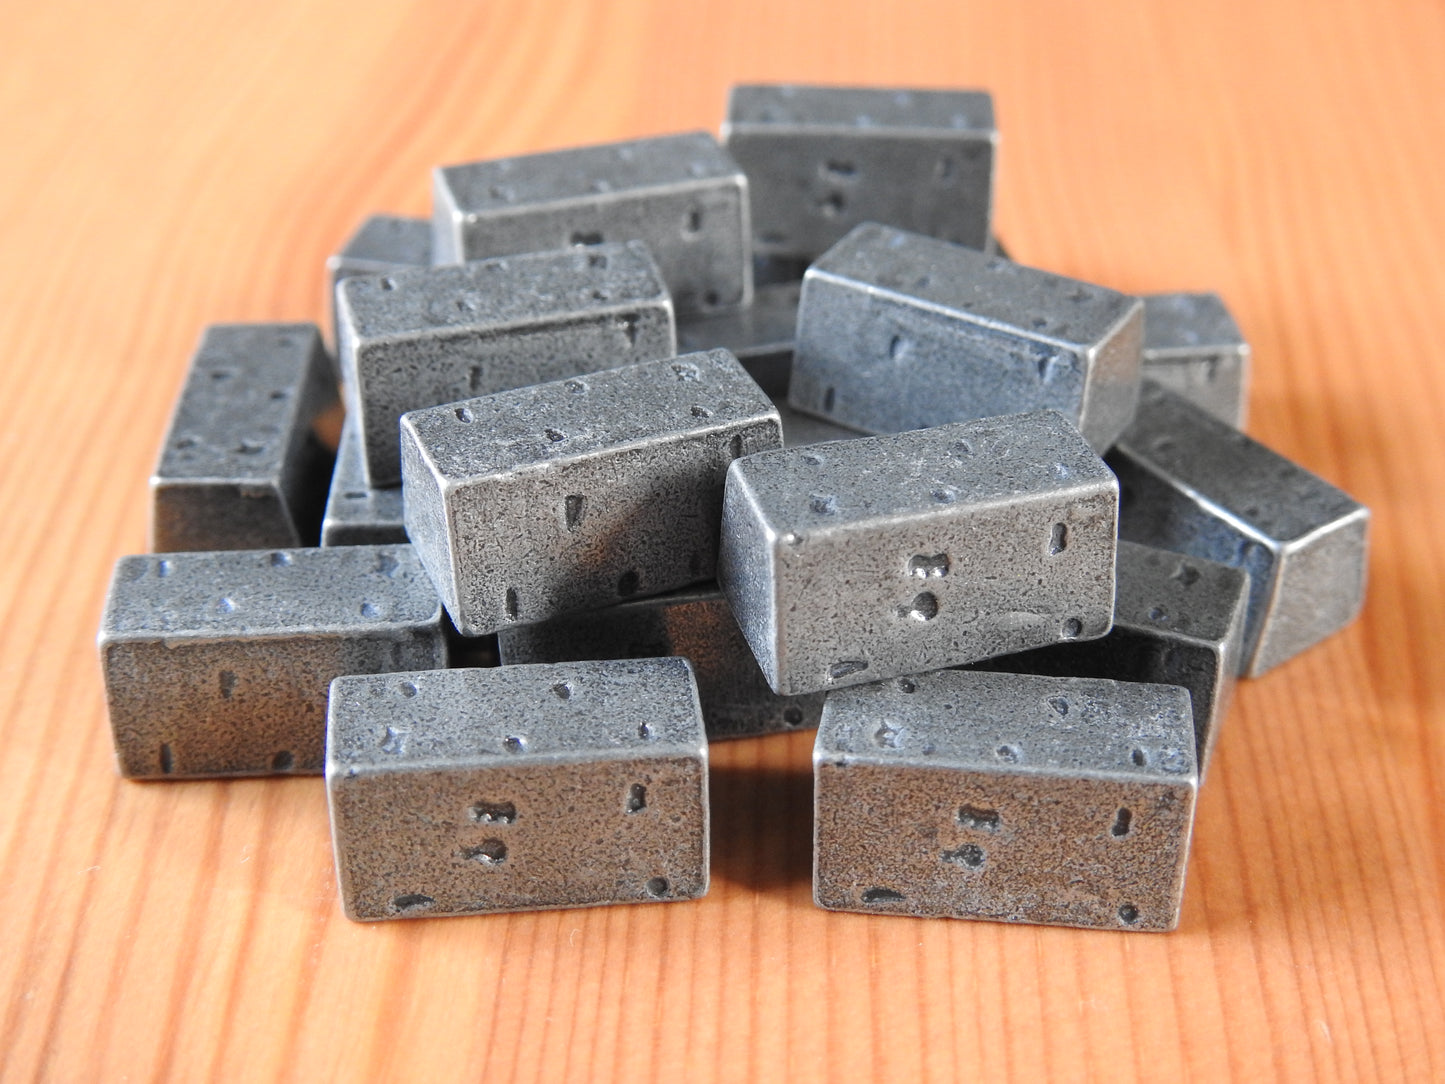 Close-up view of the metal ingots, which are made from metal.